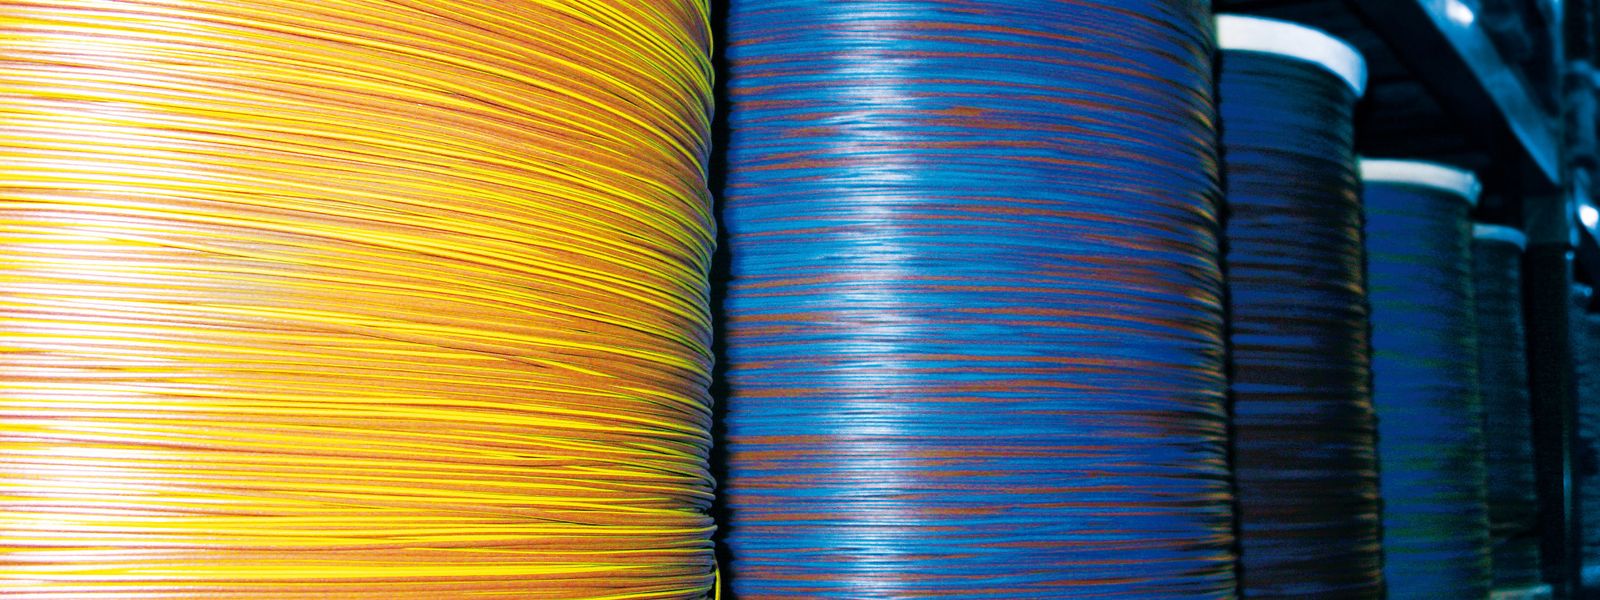 Blue and yellow automotive cables on large coils